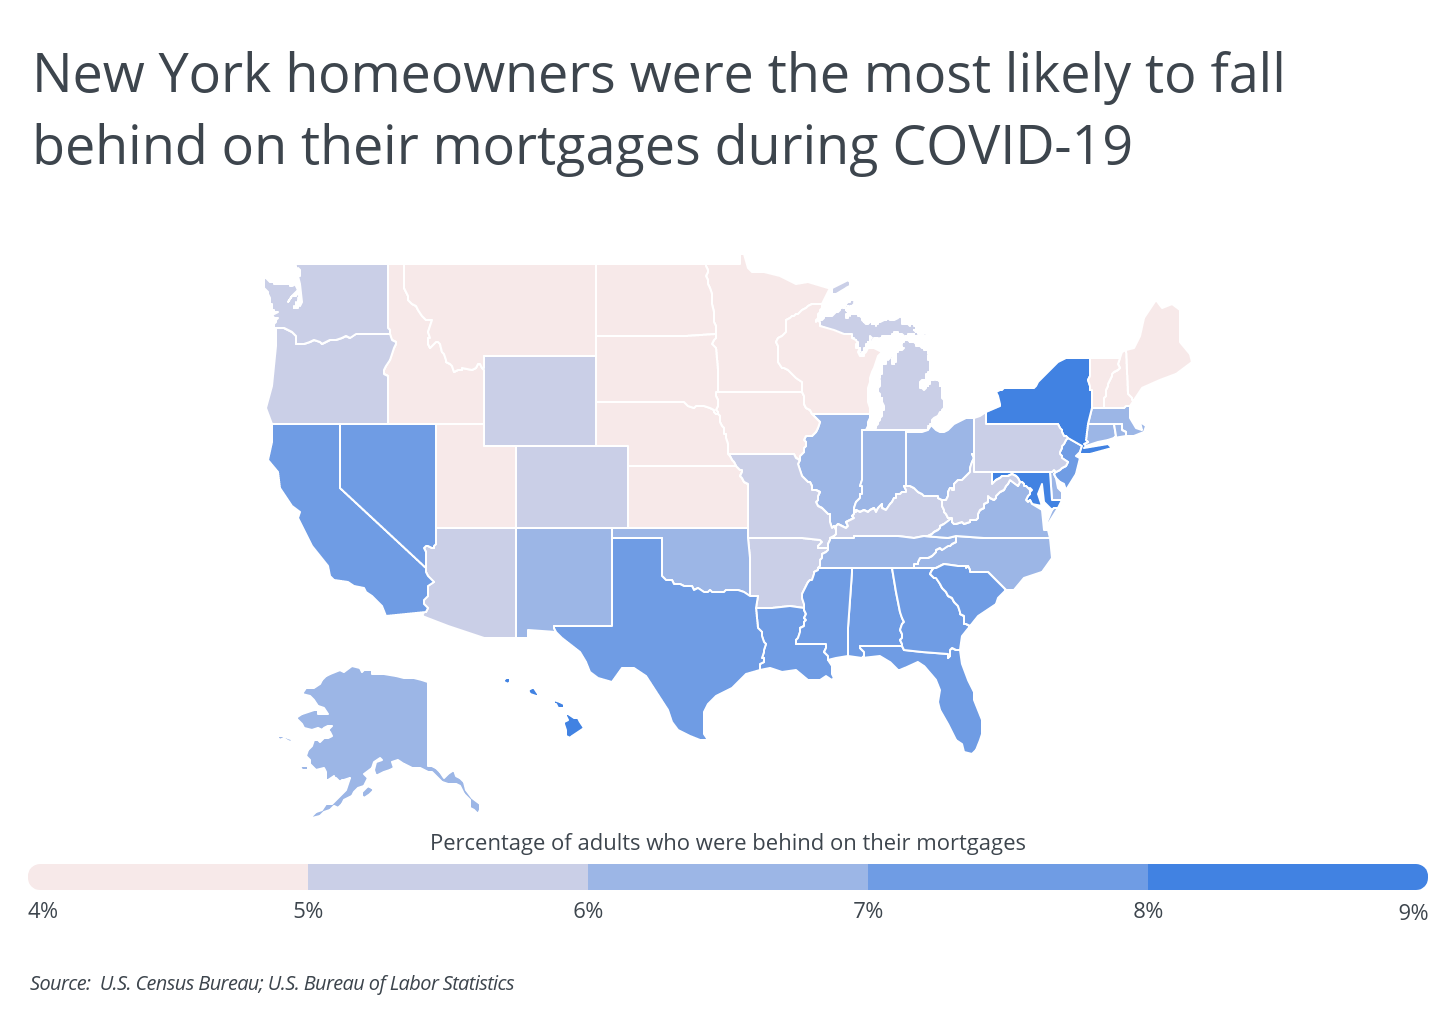 New York homeowners were the most likely to fall behind on their mortgages during COVID-19